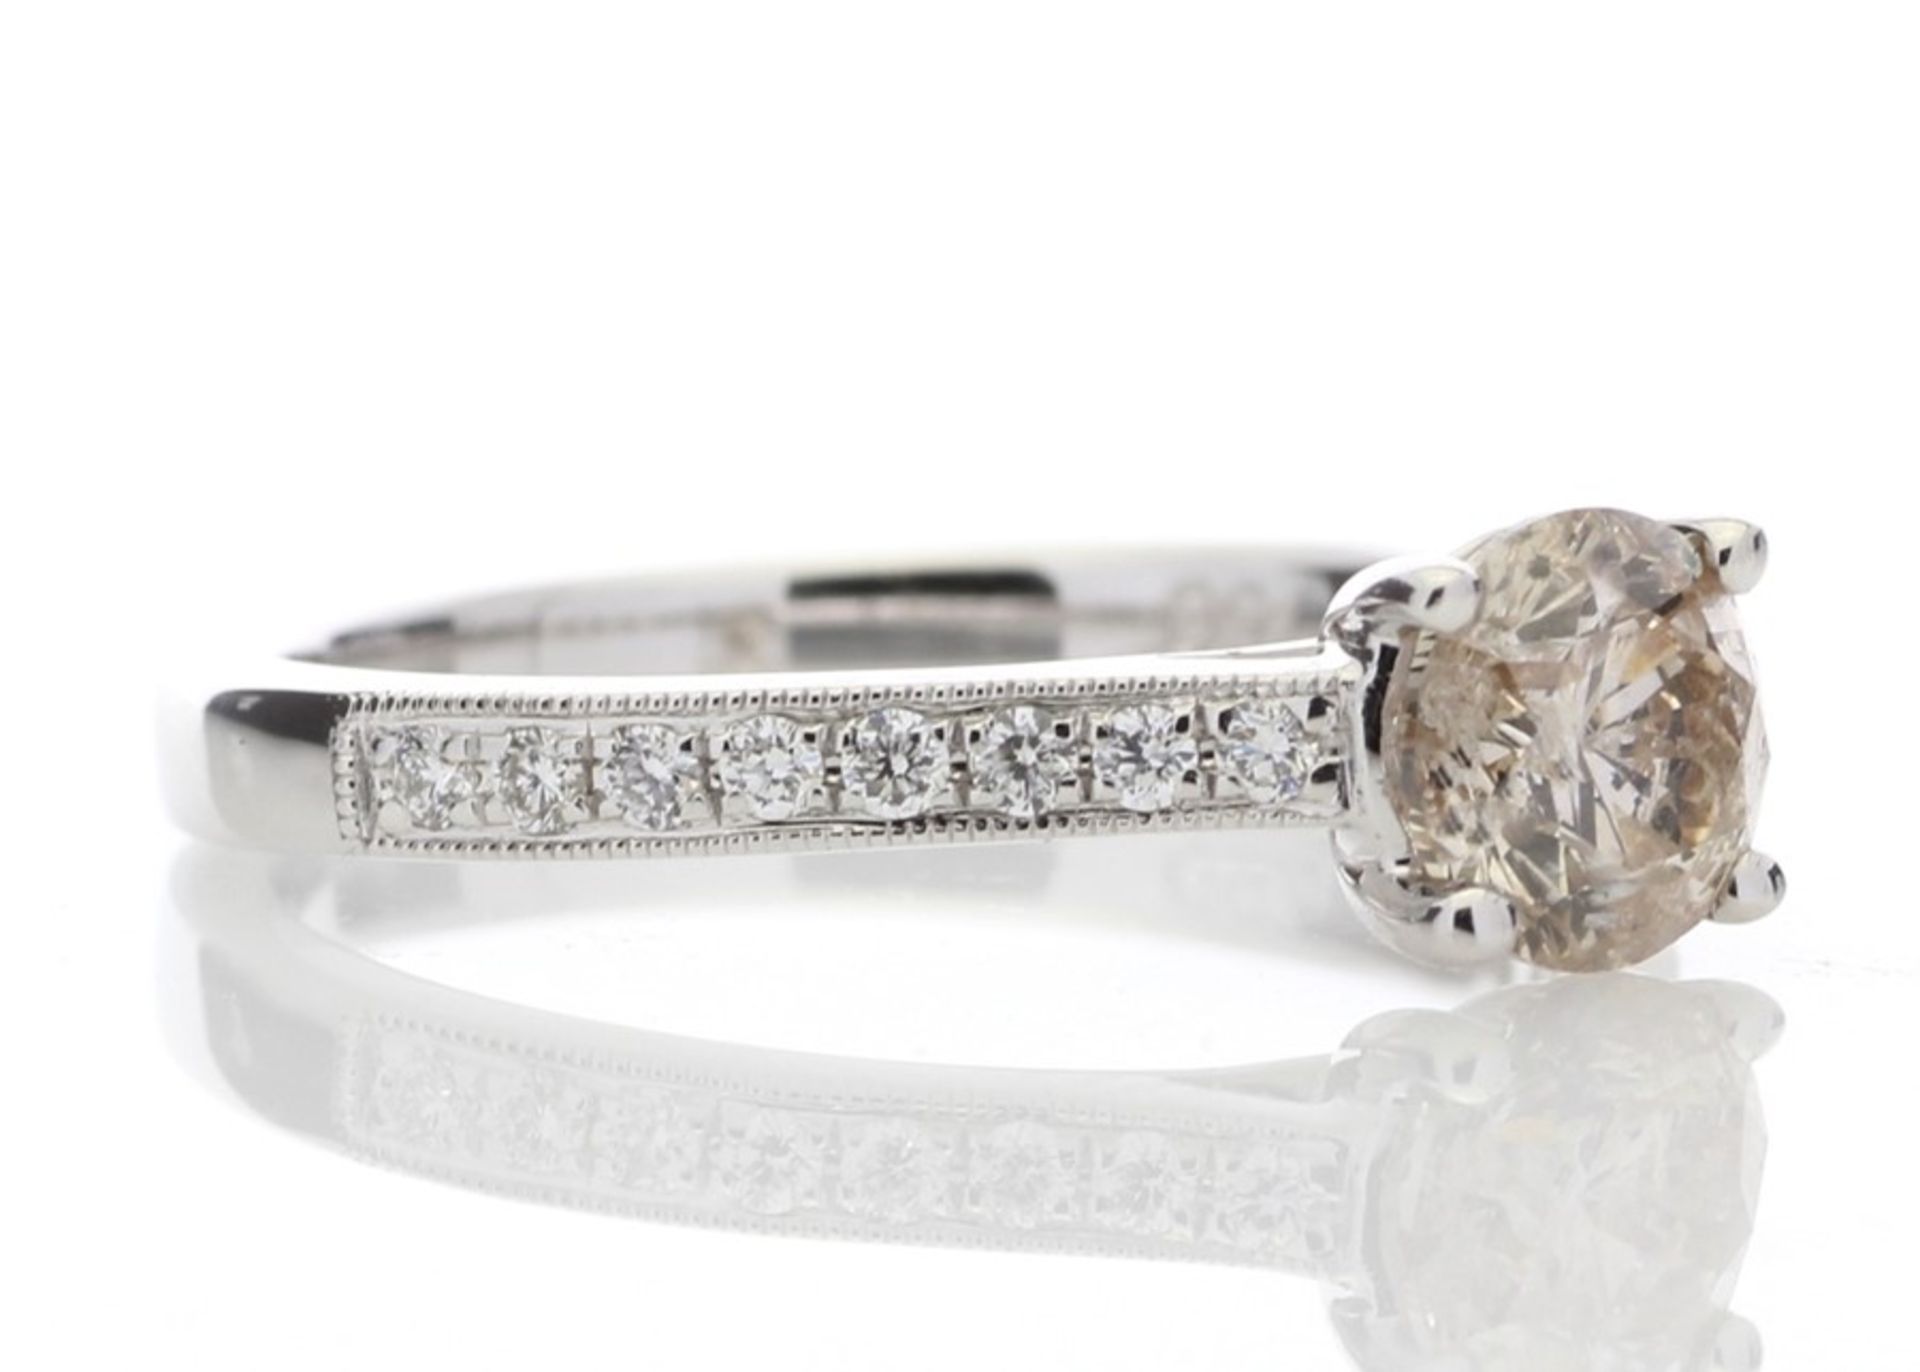 18ct White Gold Single Stone Claw Set Diamond Ring (0.91) 1.09 Carats - Valued by GIE £6,724.00 - Image 4 of 5